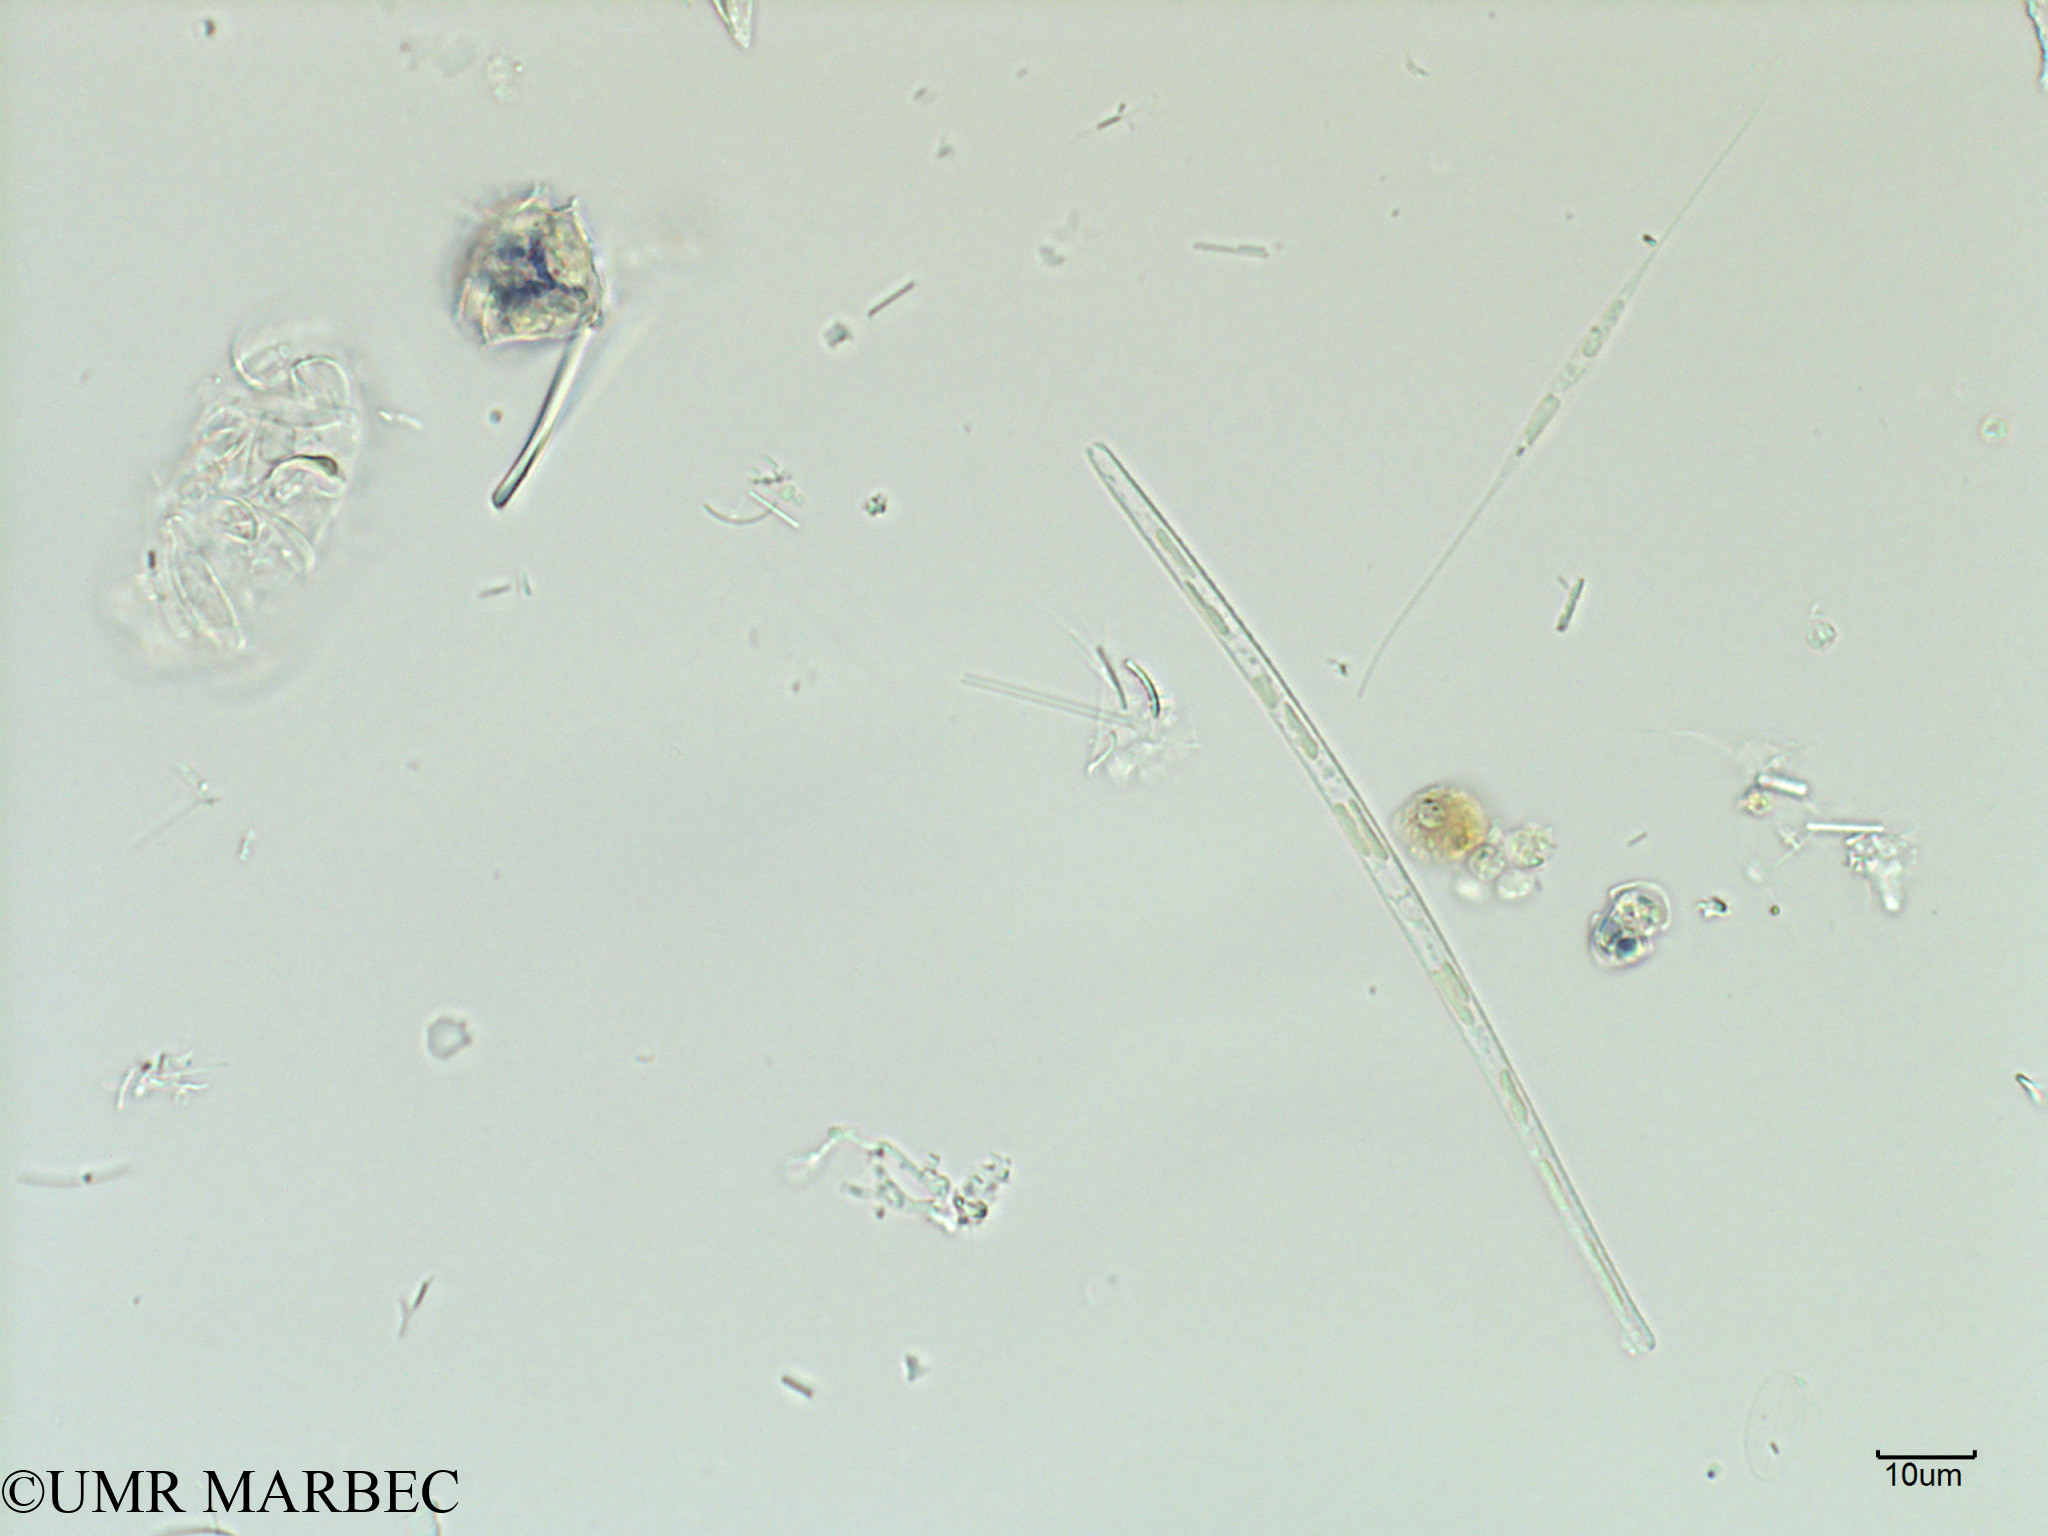 phyto/Scattered_Islands/iles_glorieuses/SIREME May 2016/Thalassionema sp5 cf frauenfeldii (Pennée spp 5-10x50-100µm -SIREME-Glorieuses2016-GLO6surf-271016-photo13)(copy).jpg